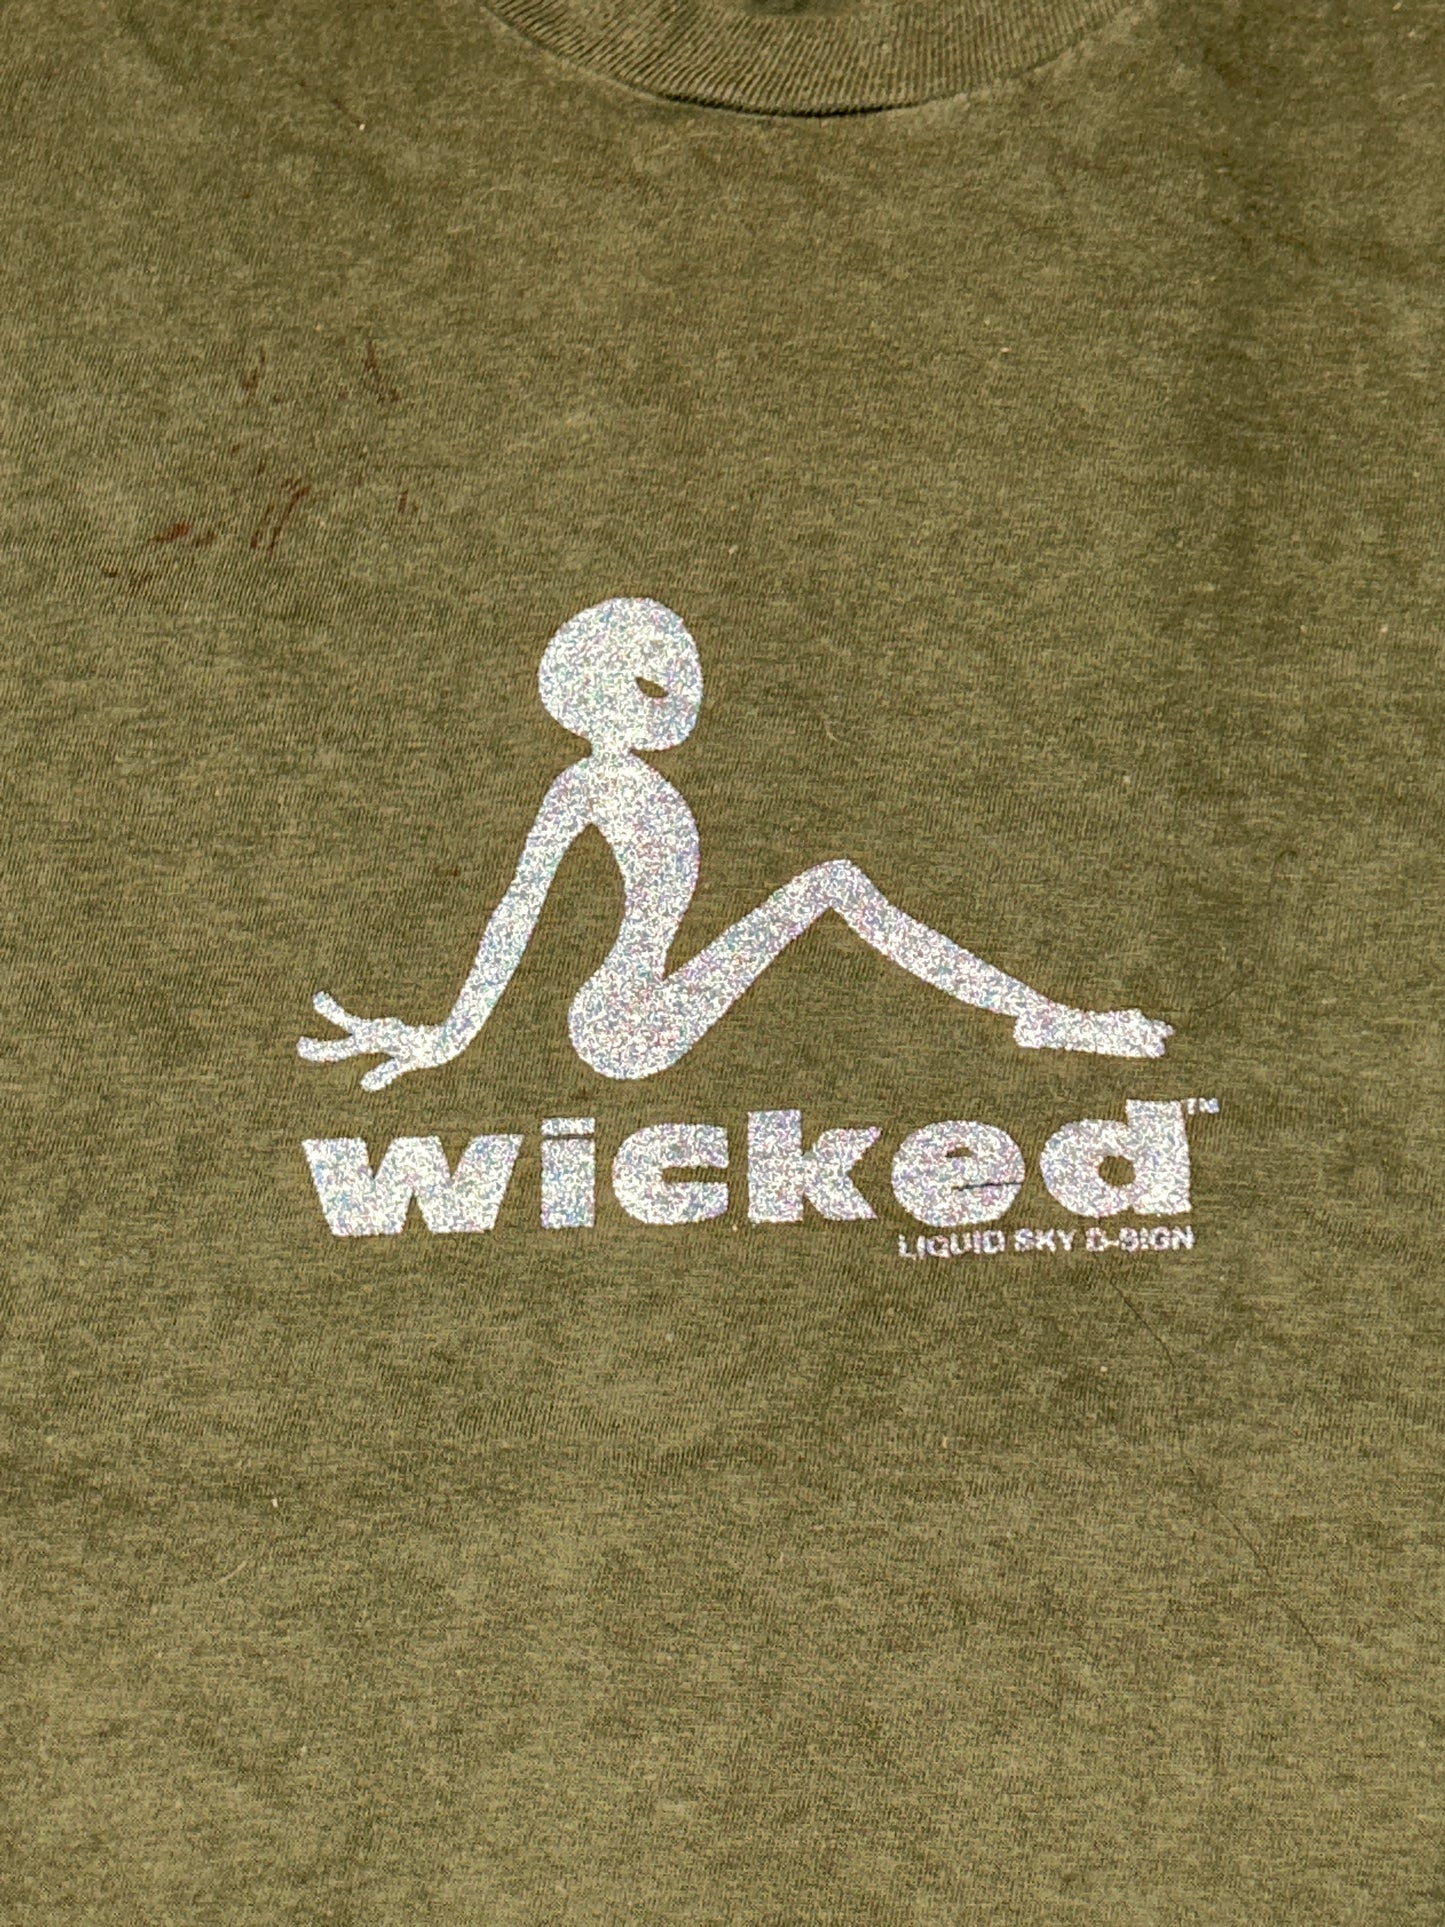 WICKED upcycled -Small